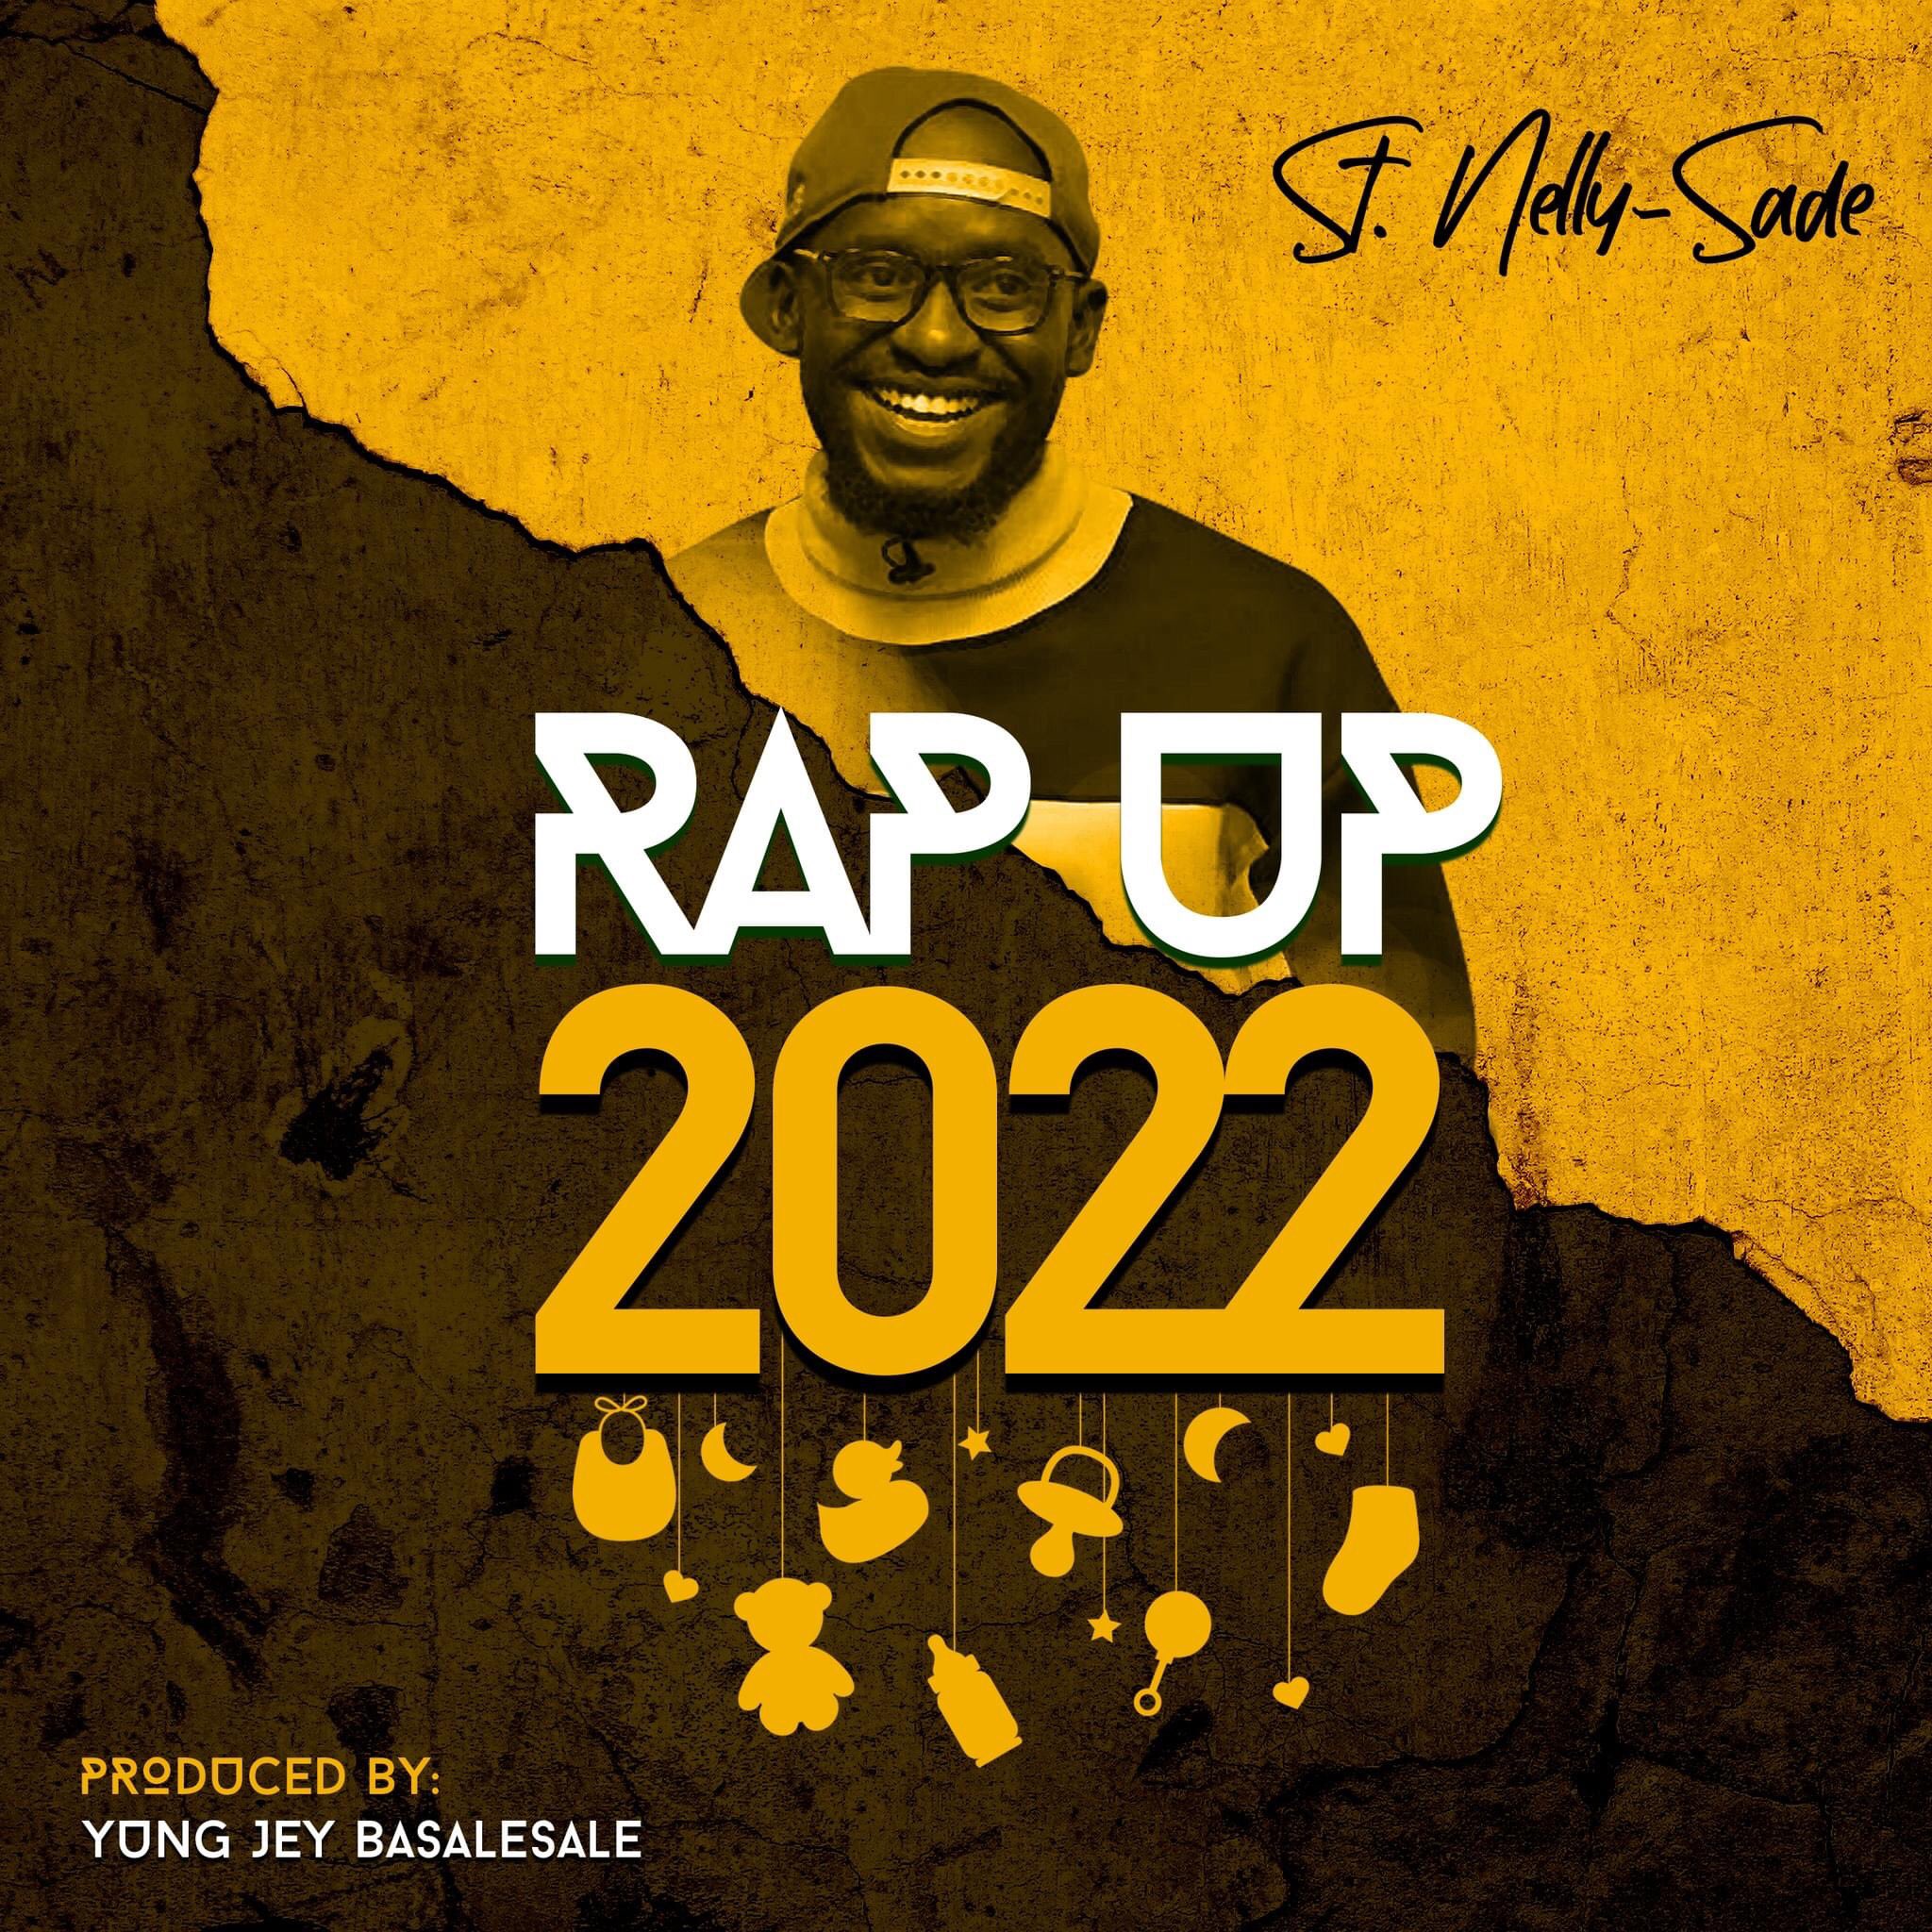 Rap Up 2022: Nyege Nyege, St. Nelly-sade is now a father and more